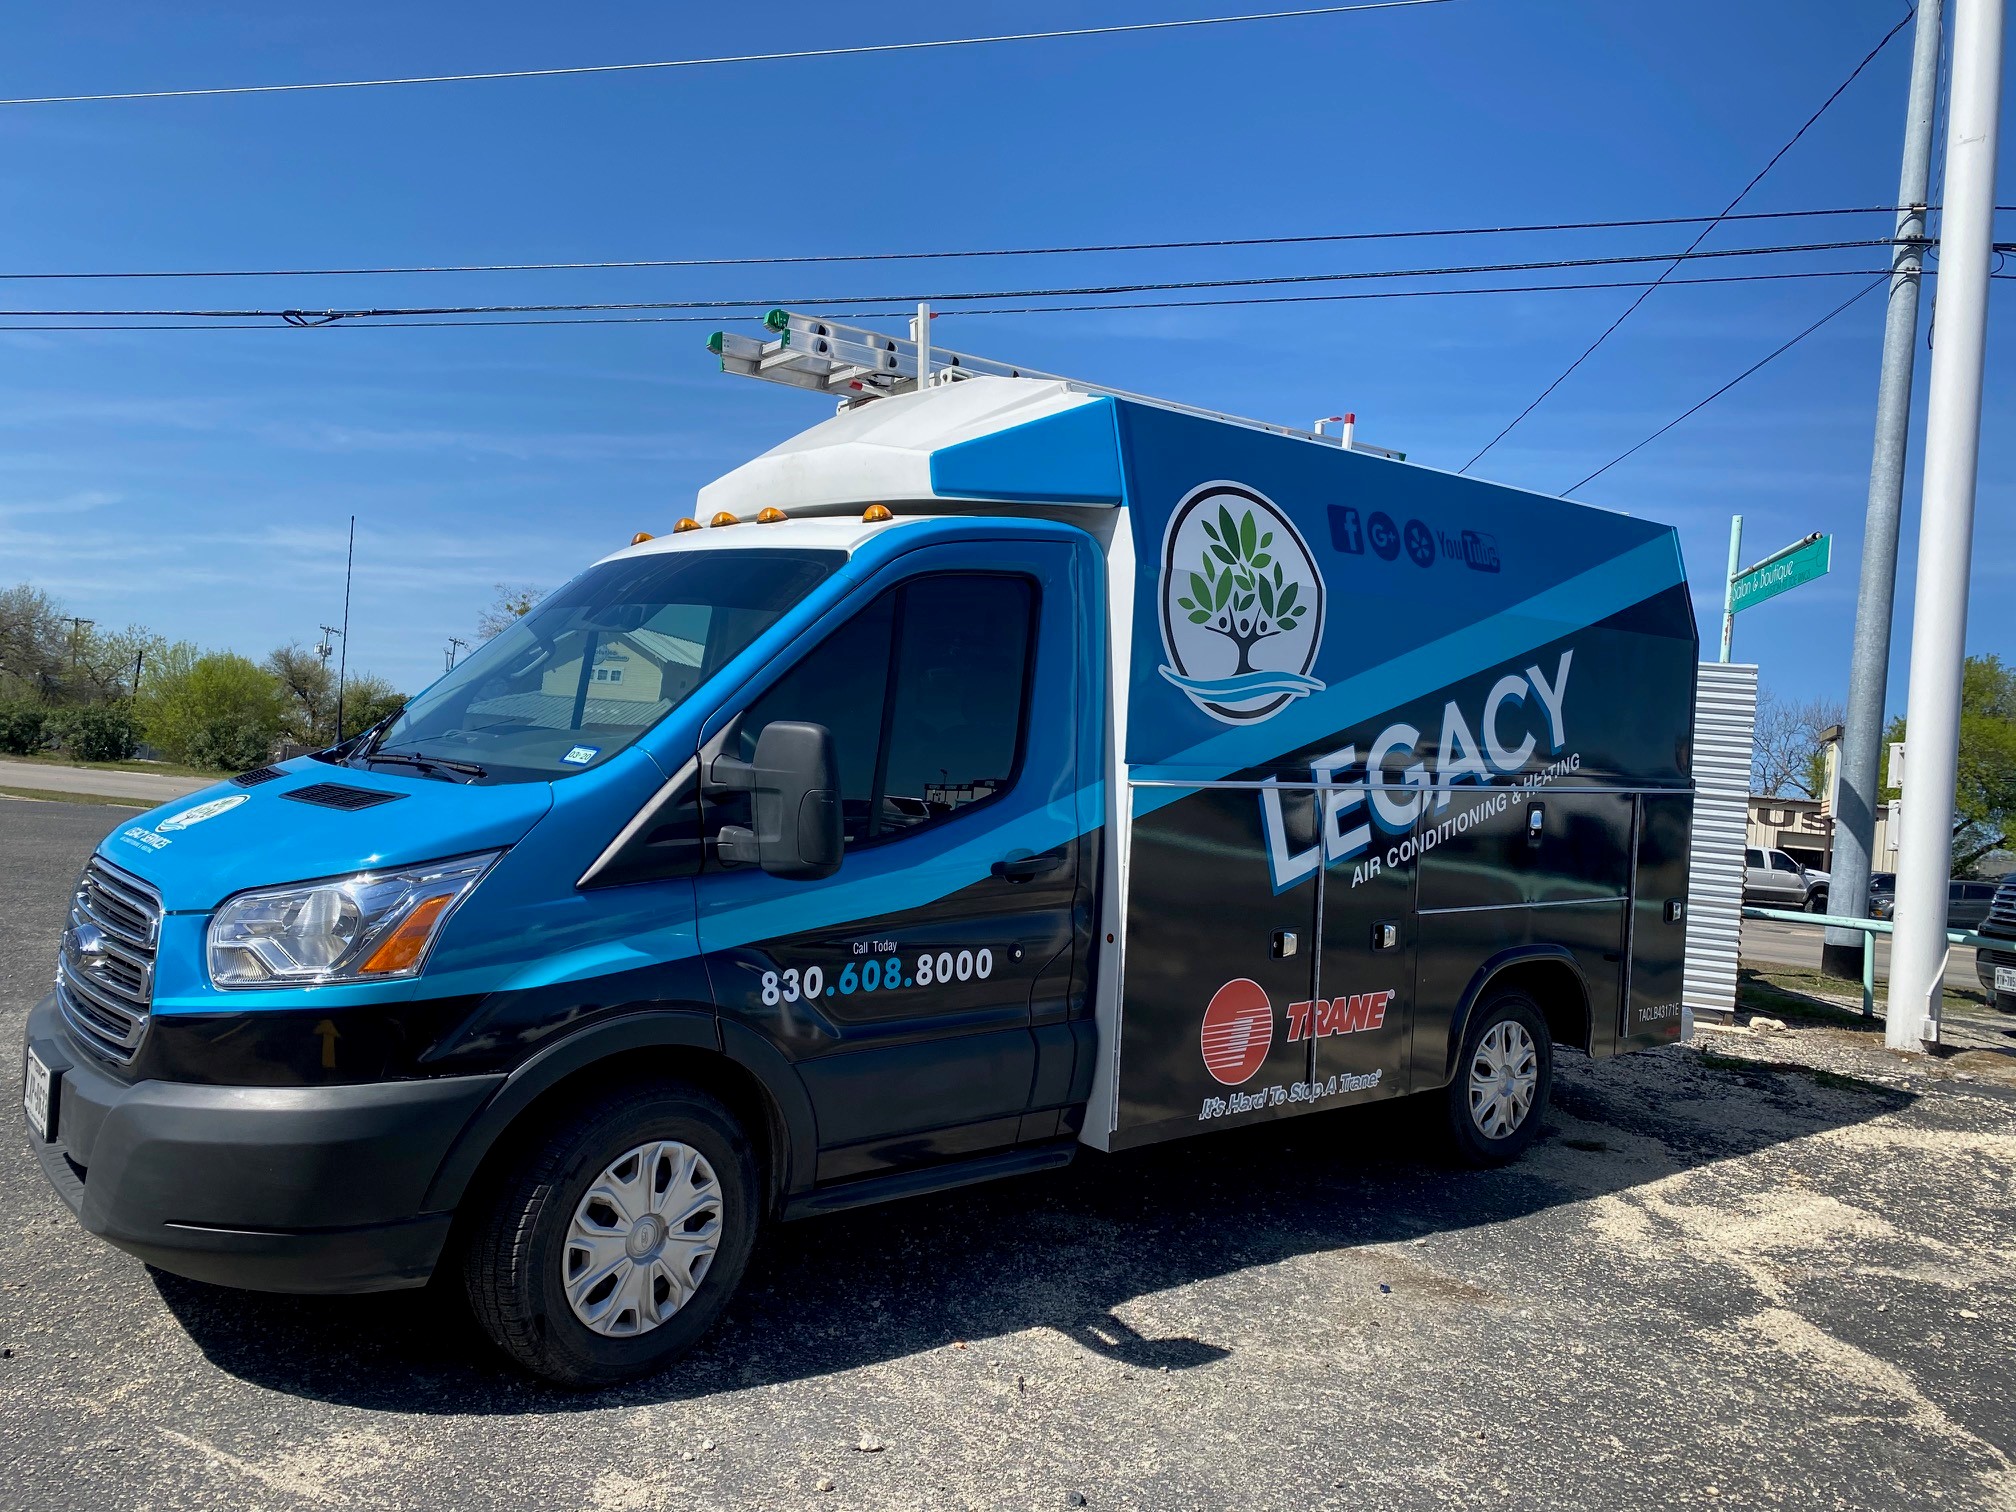 Legacy Heating & Air Conditioning truck